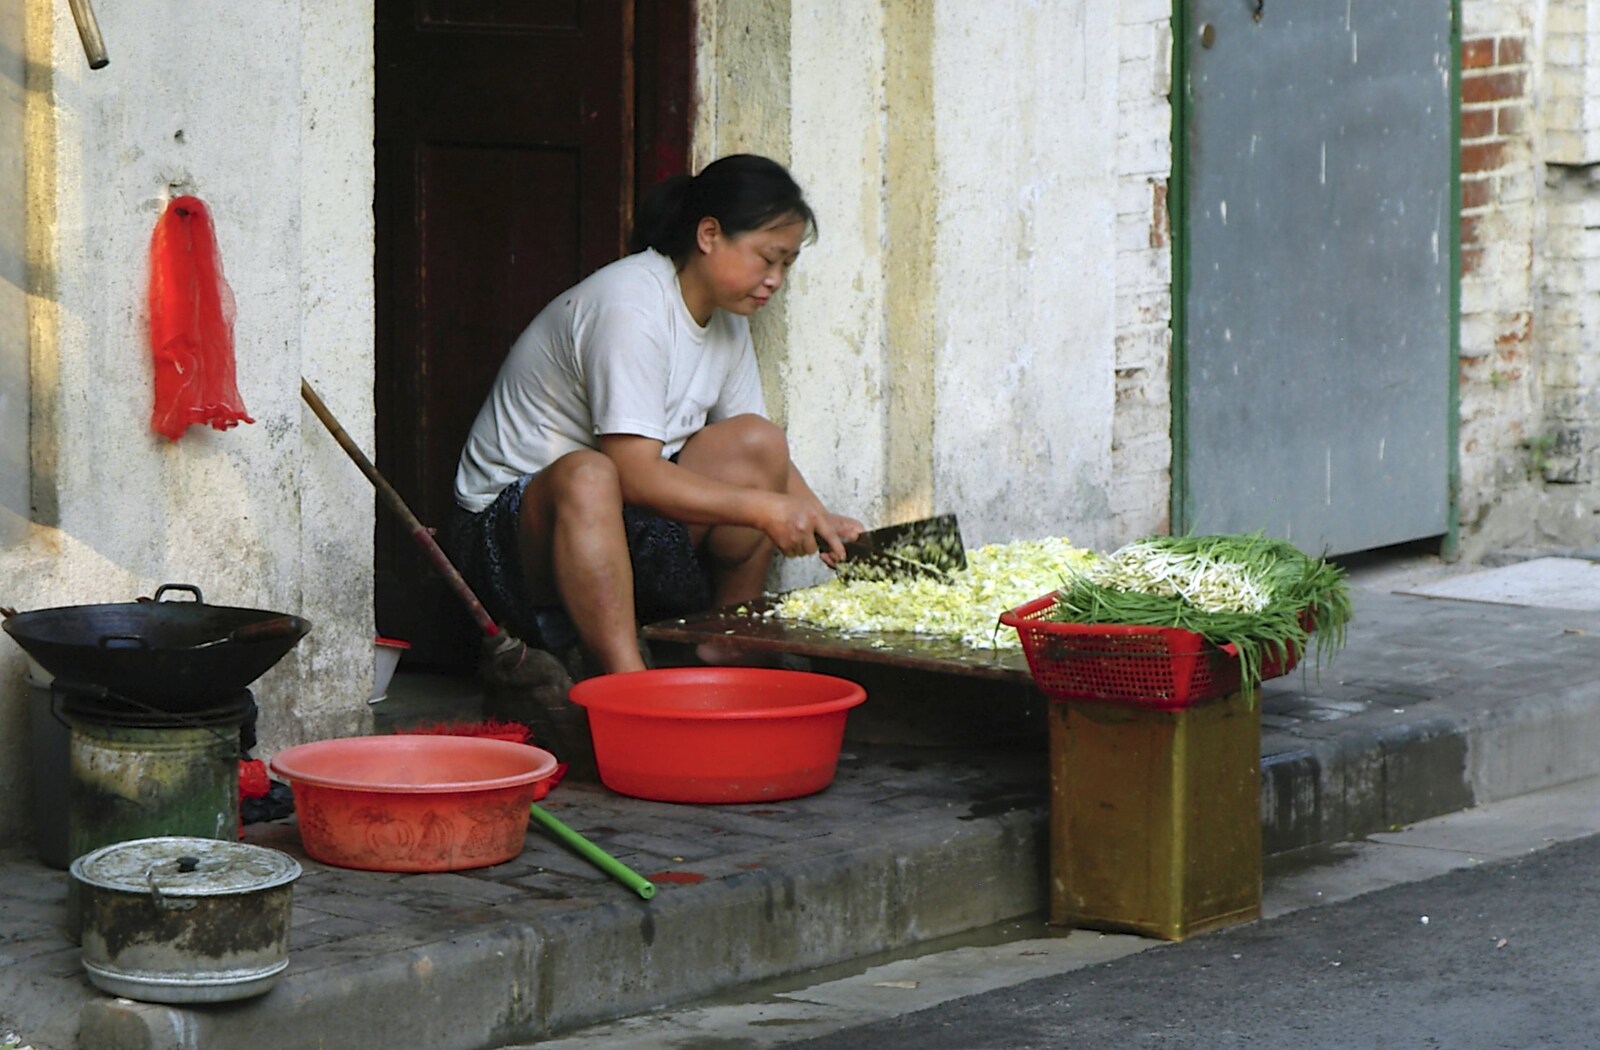 Outside a house, a woman chops vegetables from A Few Days in Nanjing, Jiangsu Province, China - 7th October 2006